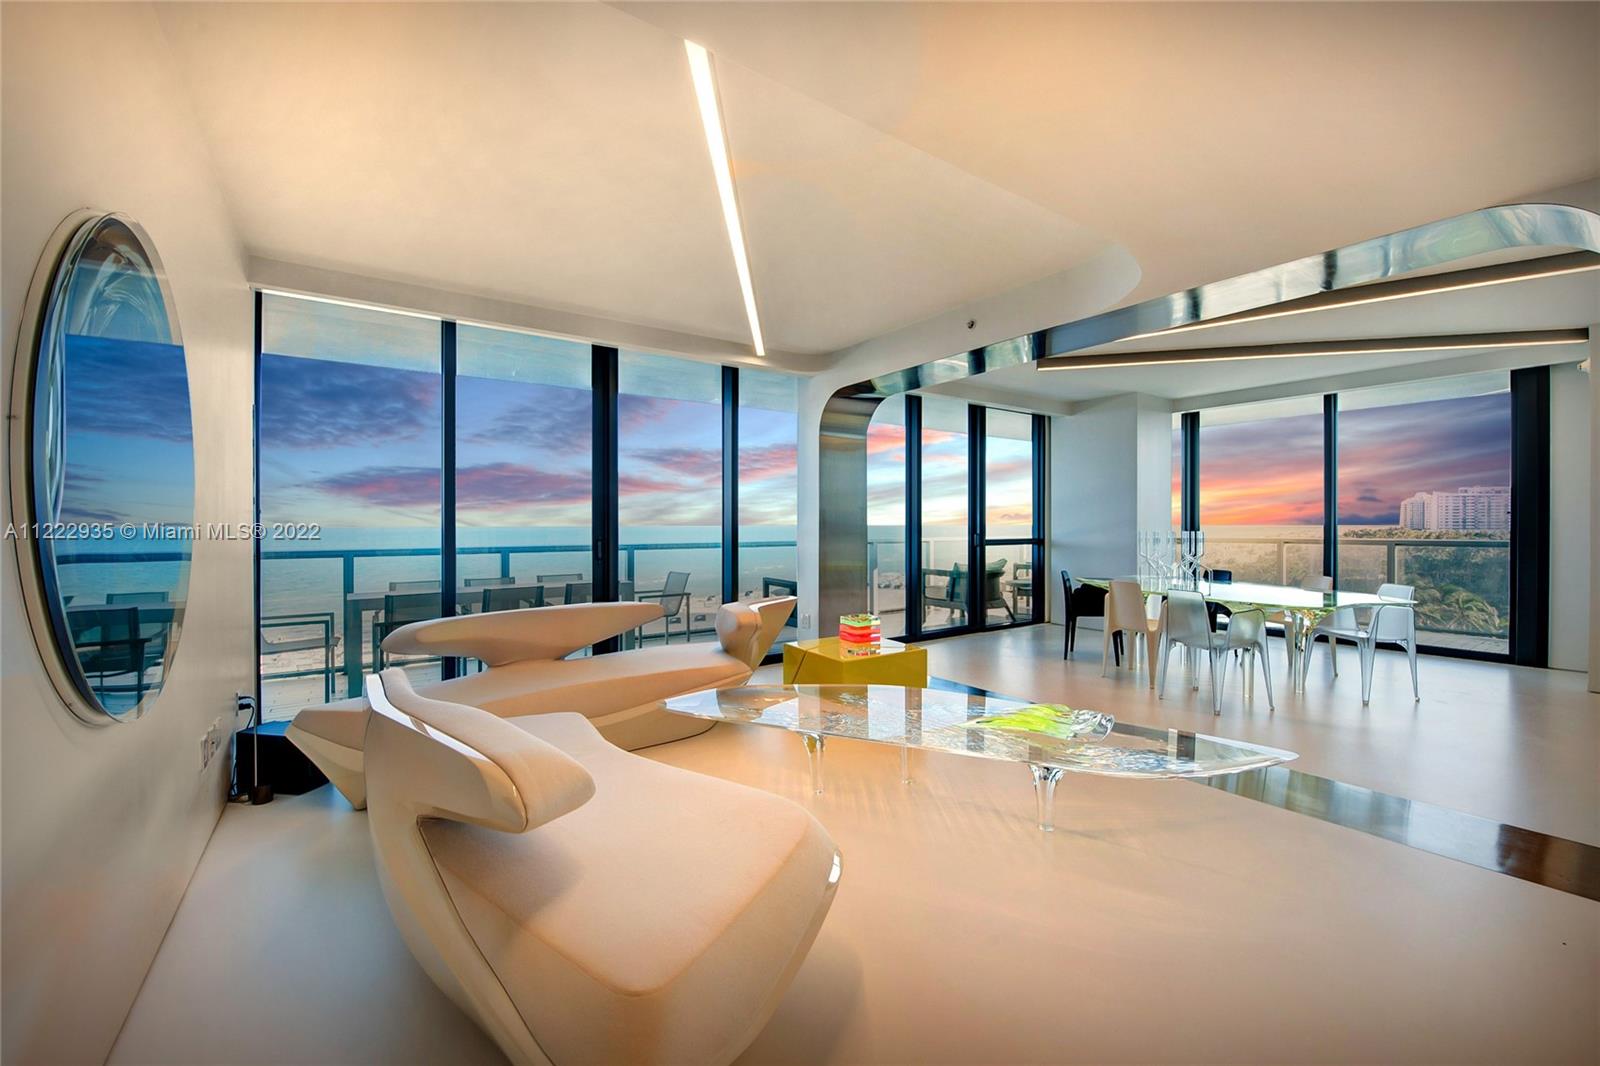 Renowned Architect Zaha Hadid's masterpiece residence at the world-renowned W South Beach. This stunning 3 Bed 4 bath with direct unobstructed water views which opens up directly to the Atlantic Ocean. Live in a one-of-a-kind sculptured residence personally designed and lived in by Zaha Hadid, the Pritzker award winning Architect. Live in Art and live at the W South Beach with 5 star hotel amenities. No rental restrictions, can be put in the hotel program or rented privately. One of the largest oceanfront 3 bedroom units in the building.